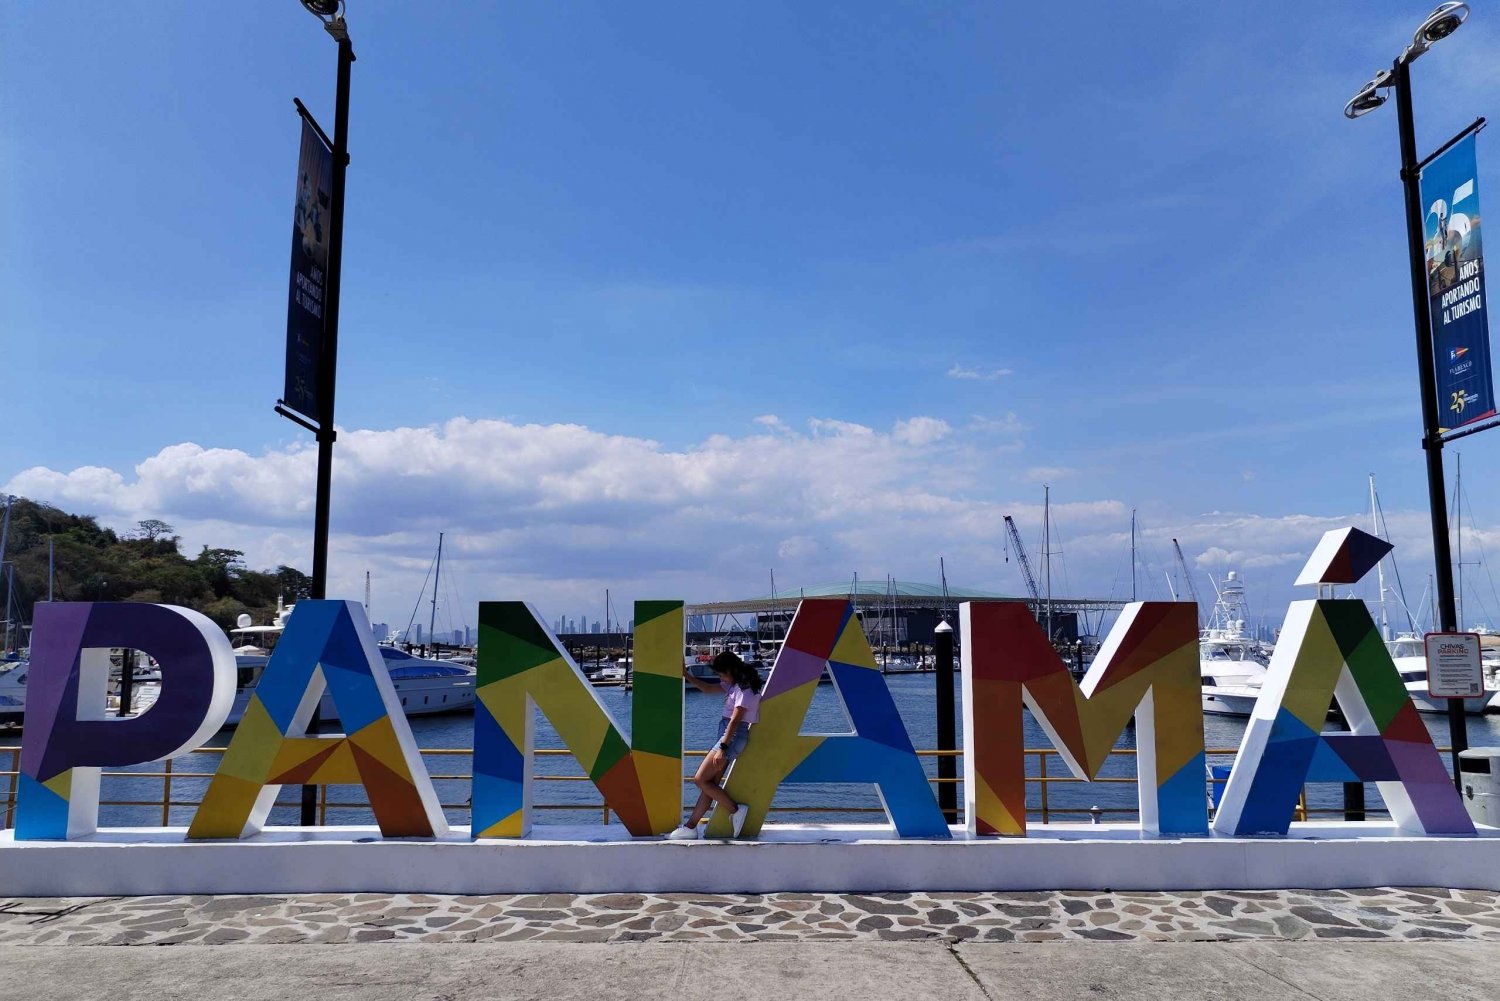 Best activitice and near Shore Excursions in Panama City, Panama